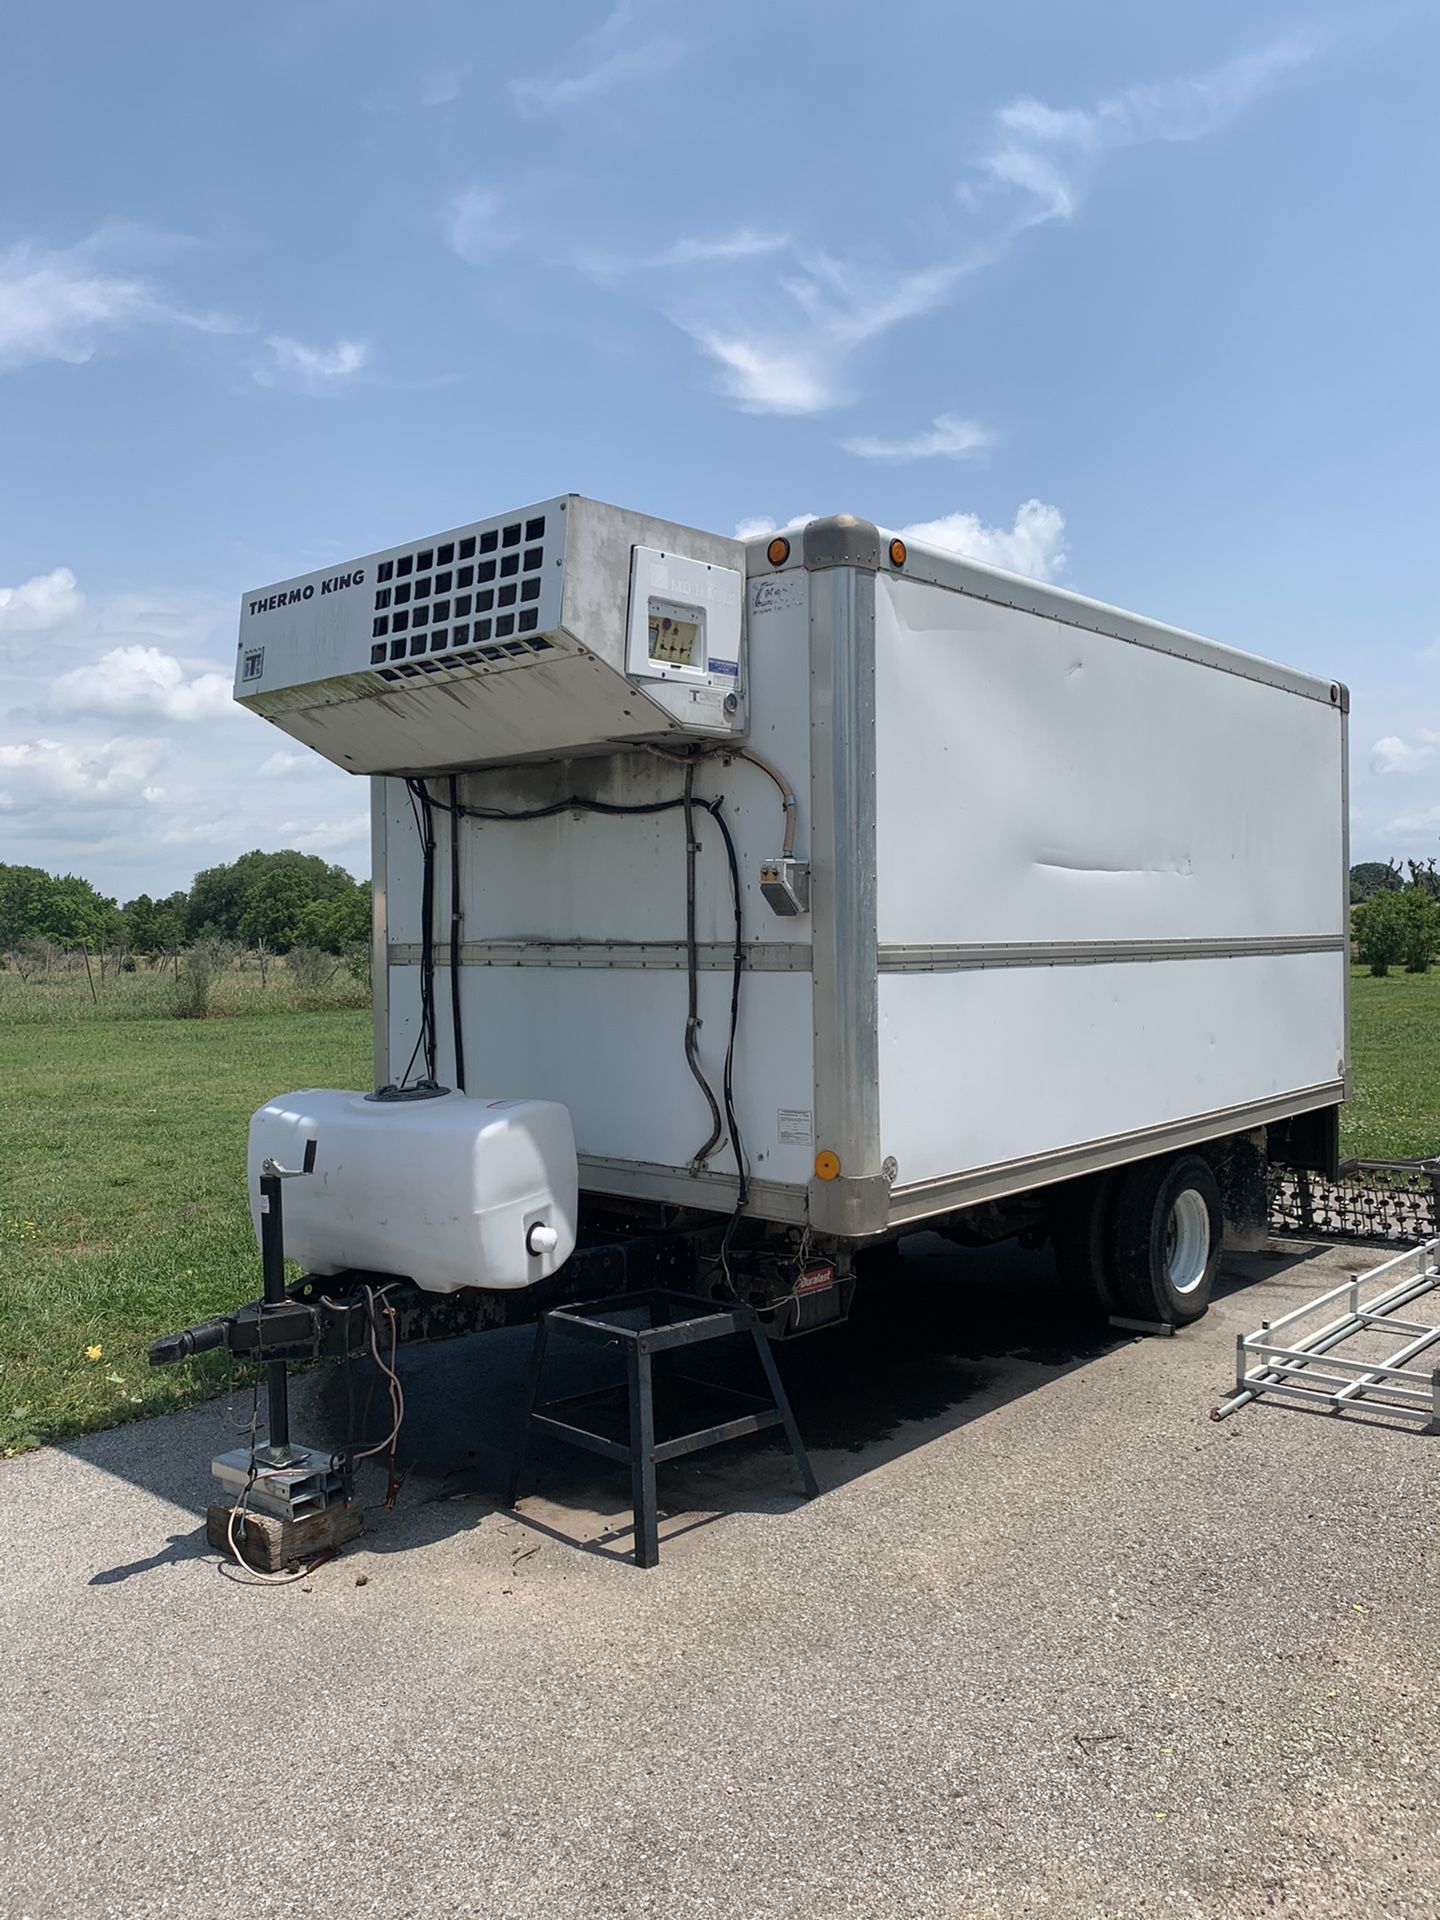 Thermo king - Refrigerated box truck trailer